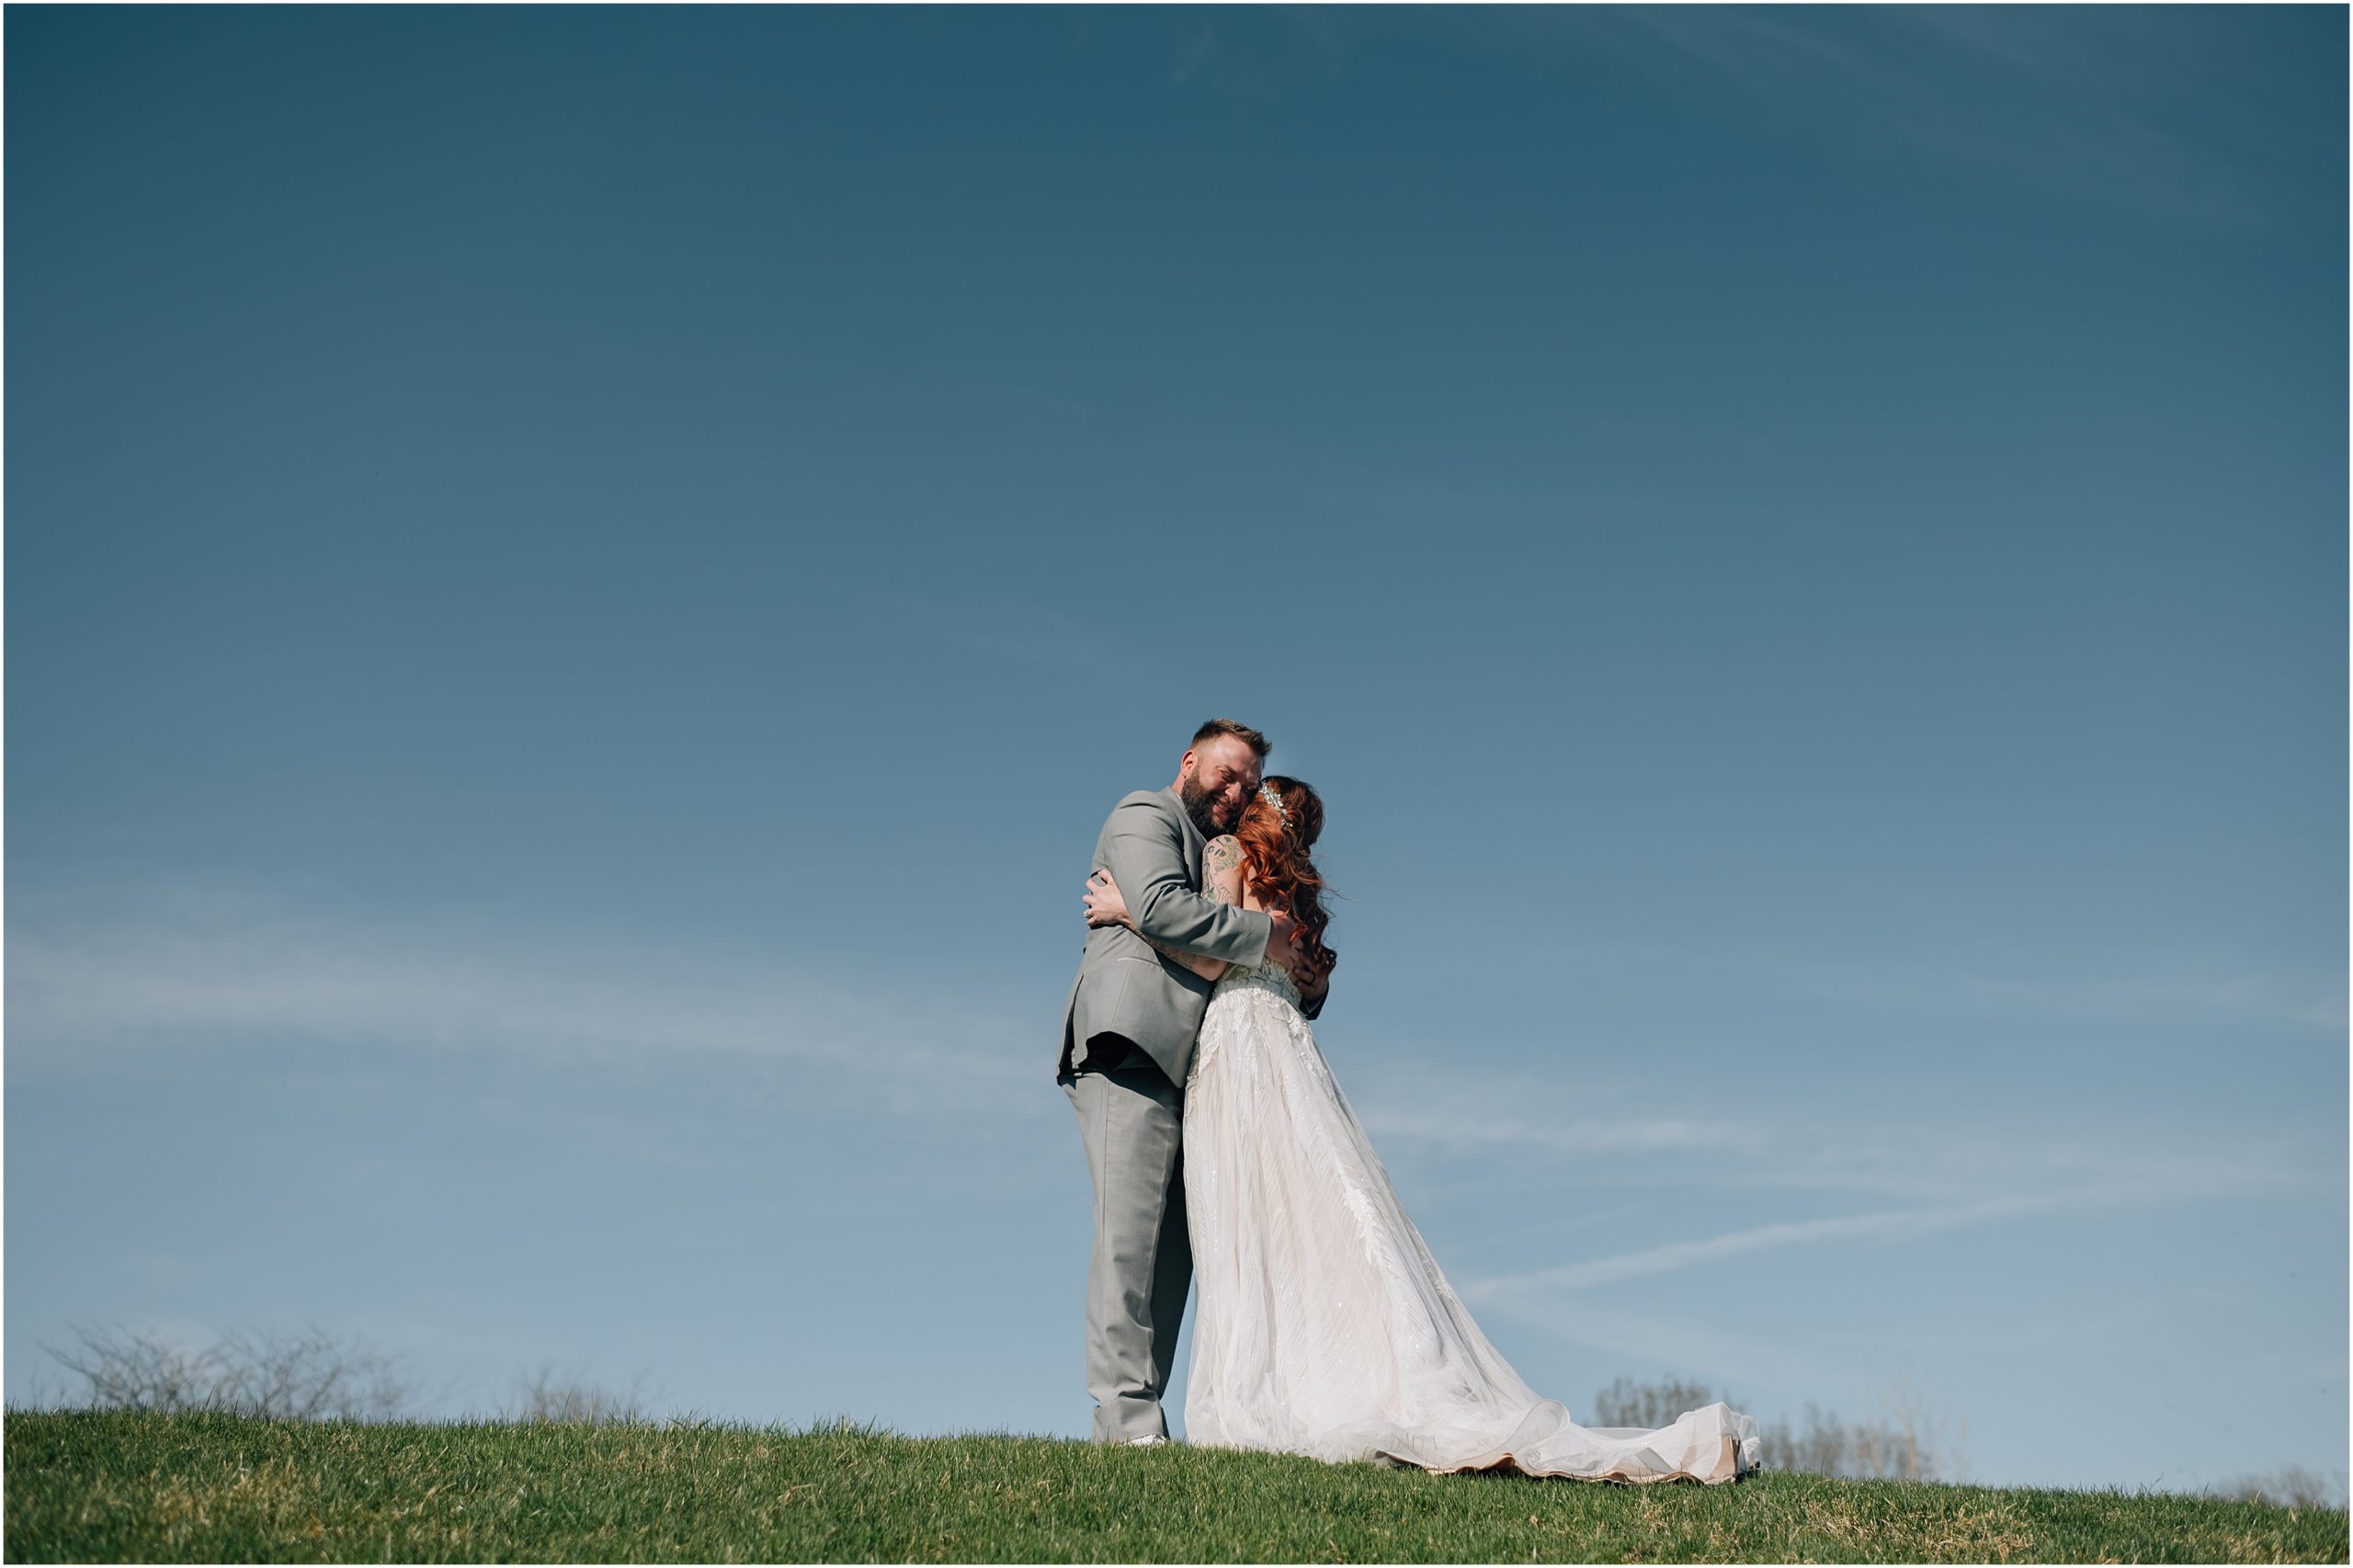 Bride in white dress with train and Groom in light grey suit share a hug on top of a hill with blue sky in the background at Honey Creek Resort on Rathbun Lake in Iowa. Photo by Anna Brace, who specializes in Omaha NE wedding photography.